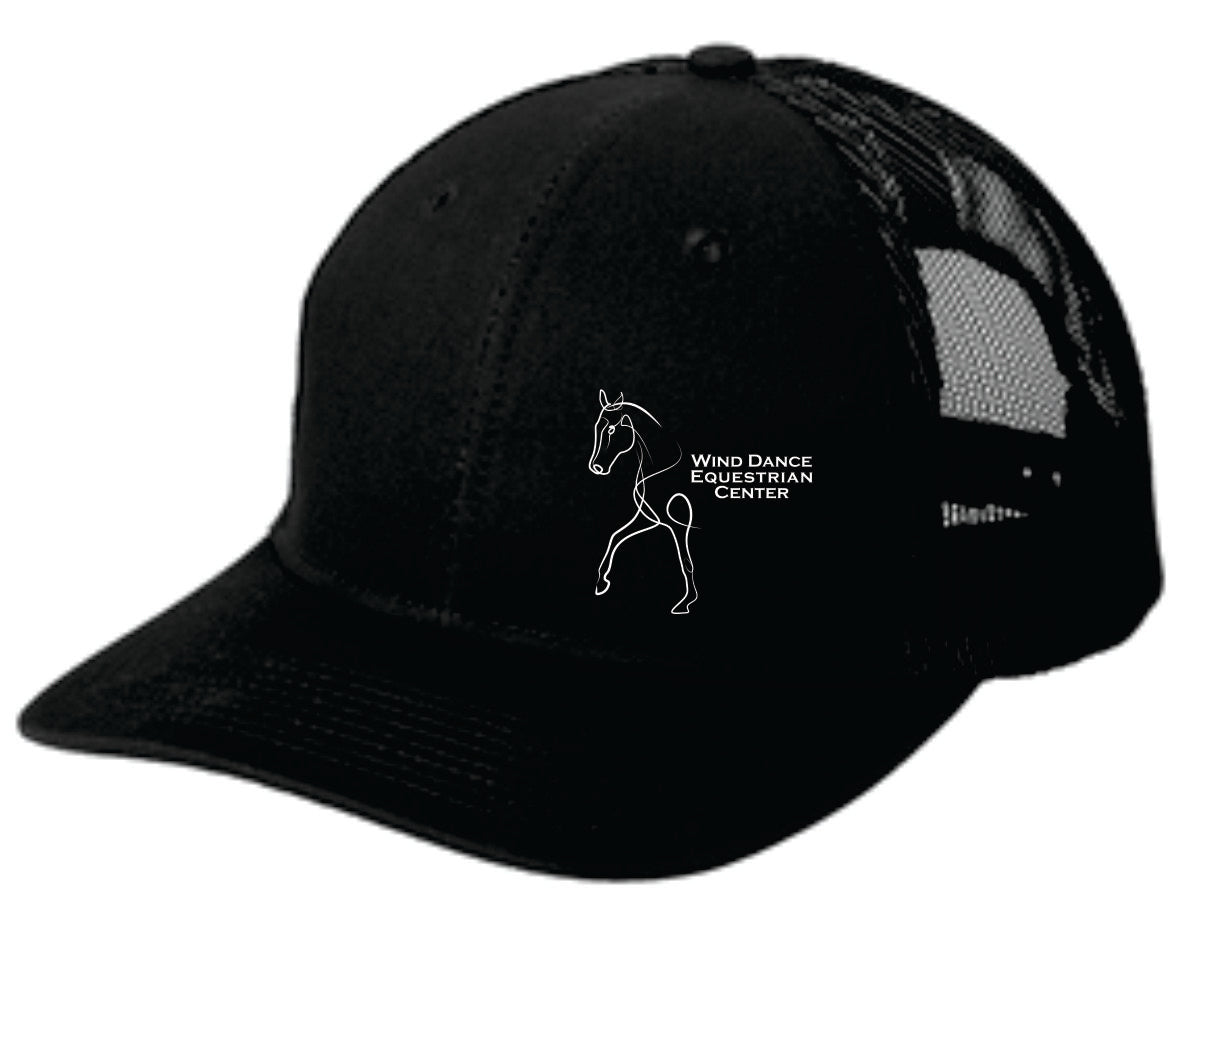 Wind Dance Equestrian Center Embroidered Hats